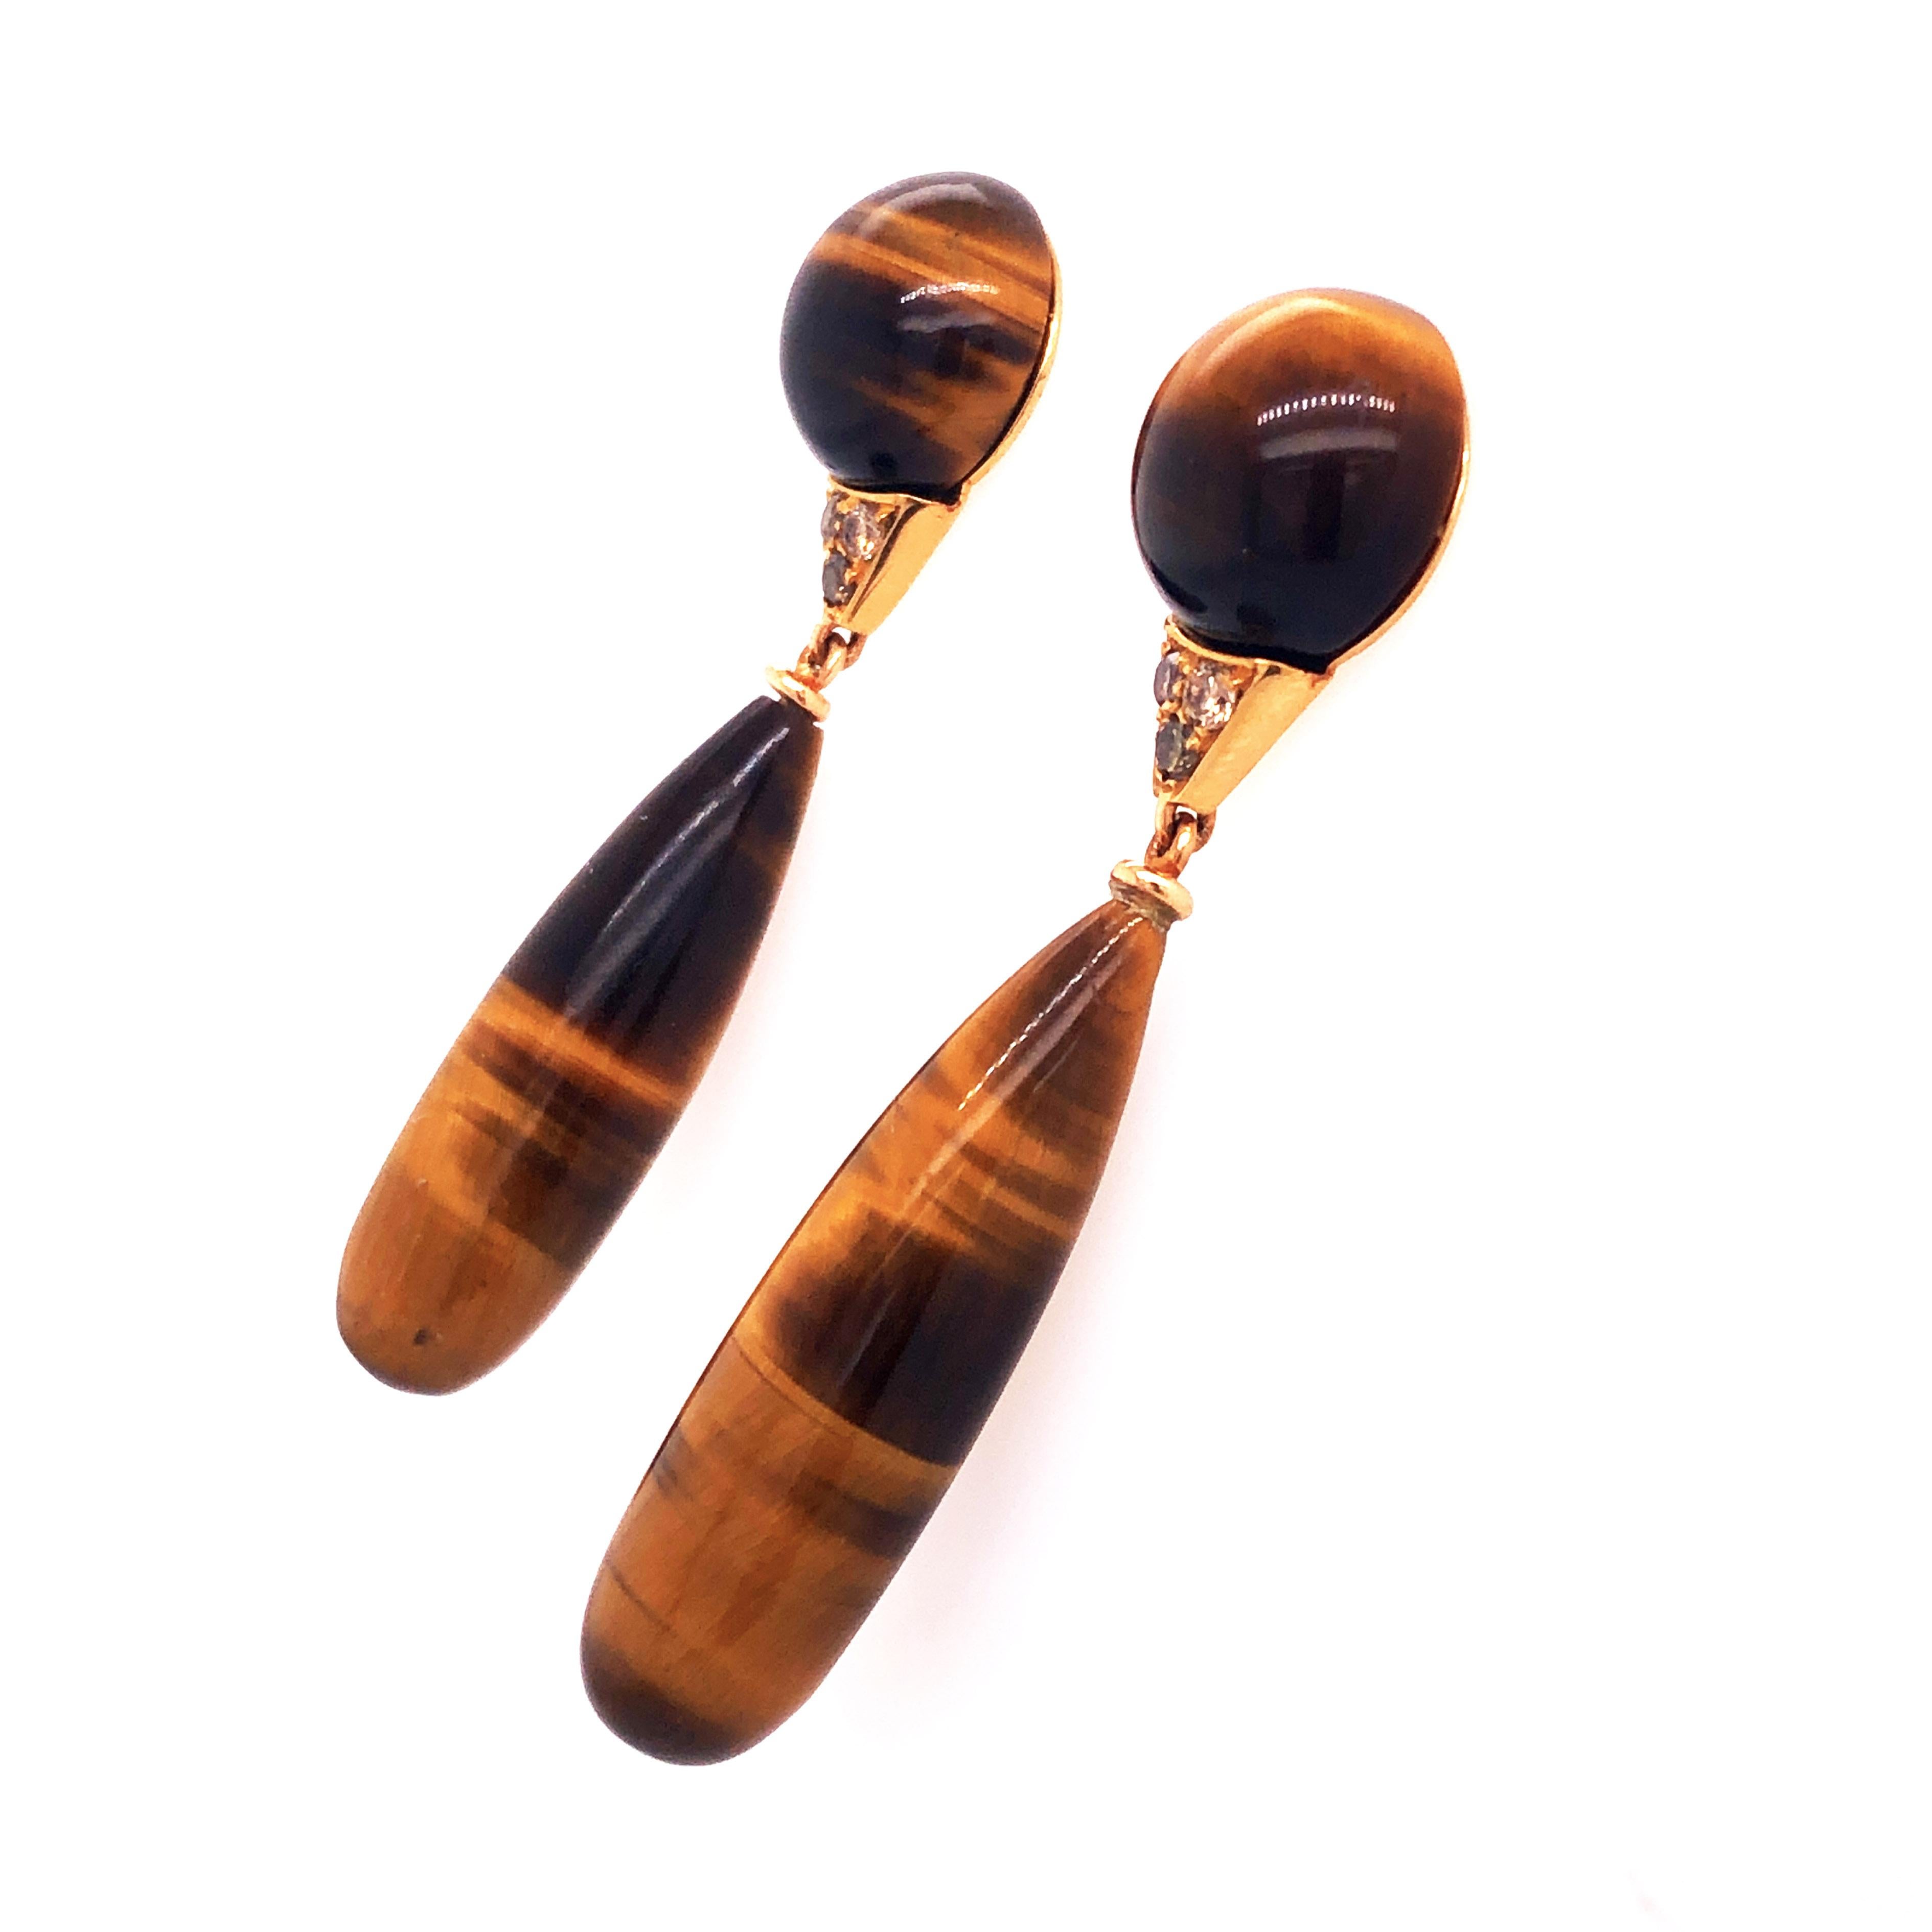 One-of-a-kind Chic yet Timeless Drop Earrings featuring 60.2 Hand Inlaid Natural Round Cabochon and Drop Cut Tiger's Eye in a 0.27 Champagne Diamond 0.131 t oz 18K Yellow Gold Setting.
In our smart fitted box and pouch.

Lenght 2.04 inches,